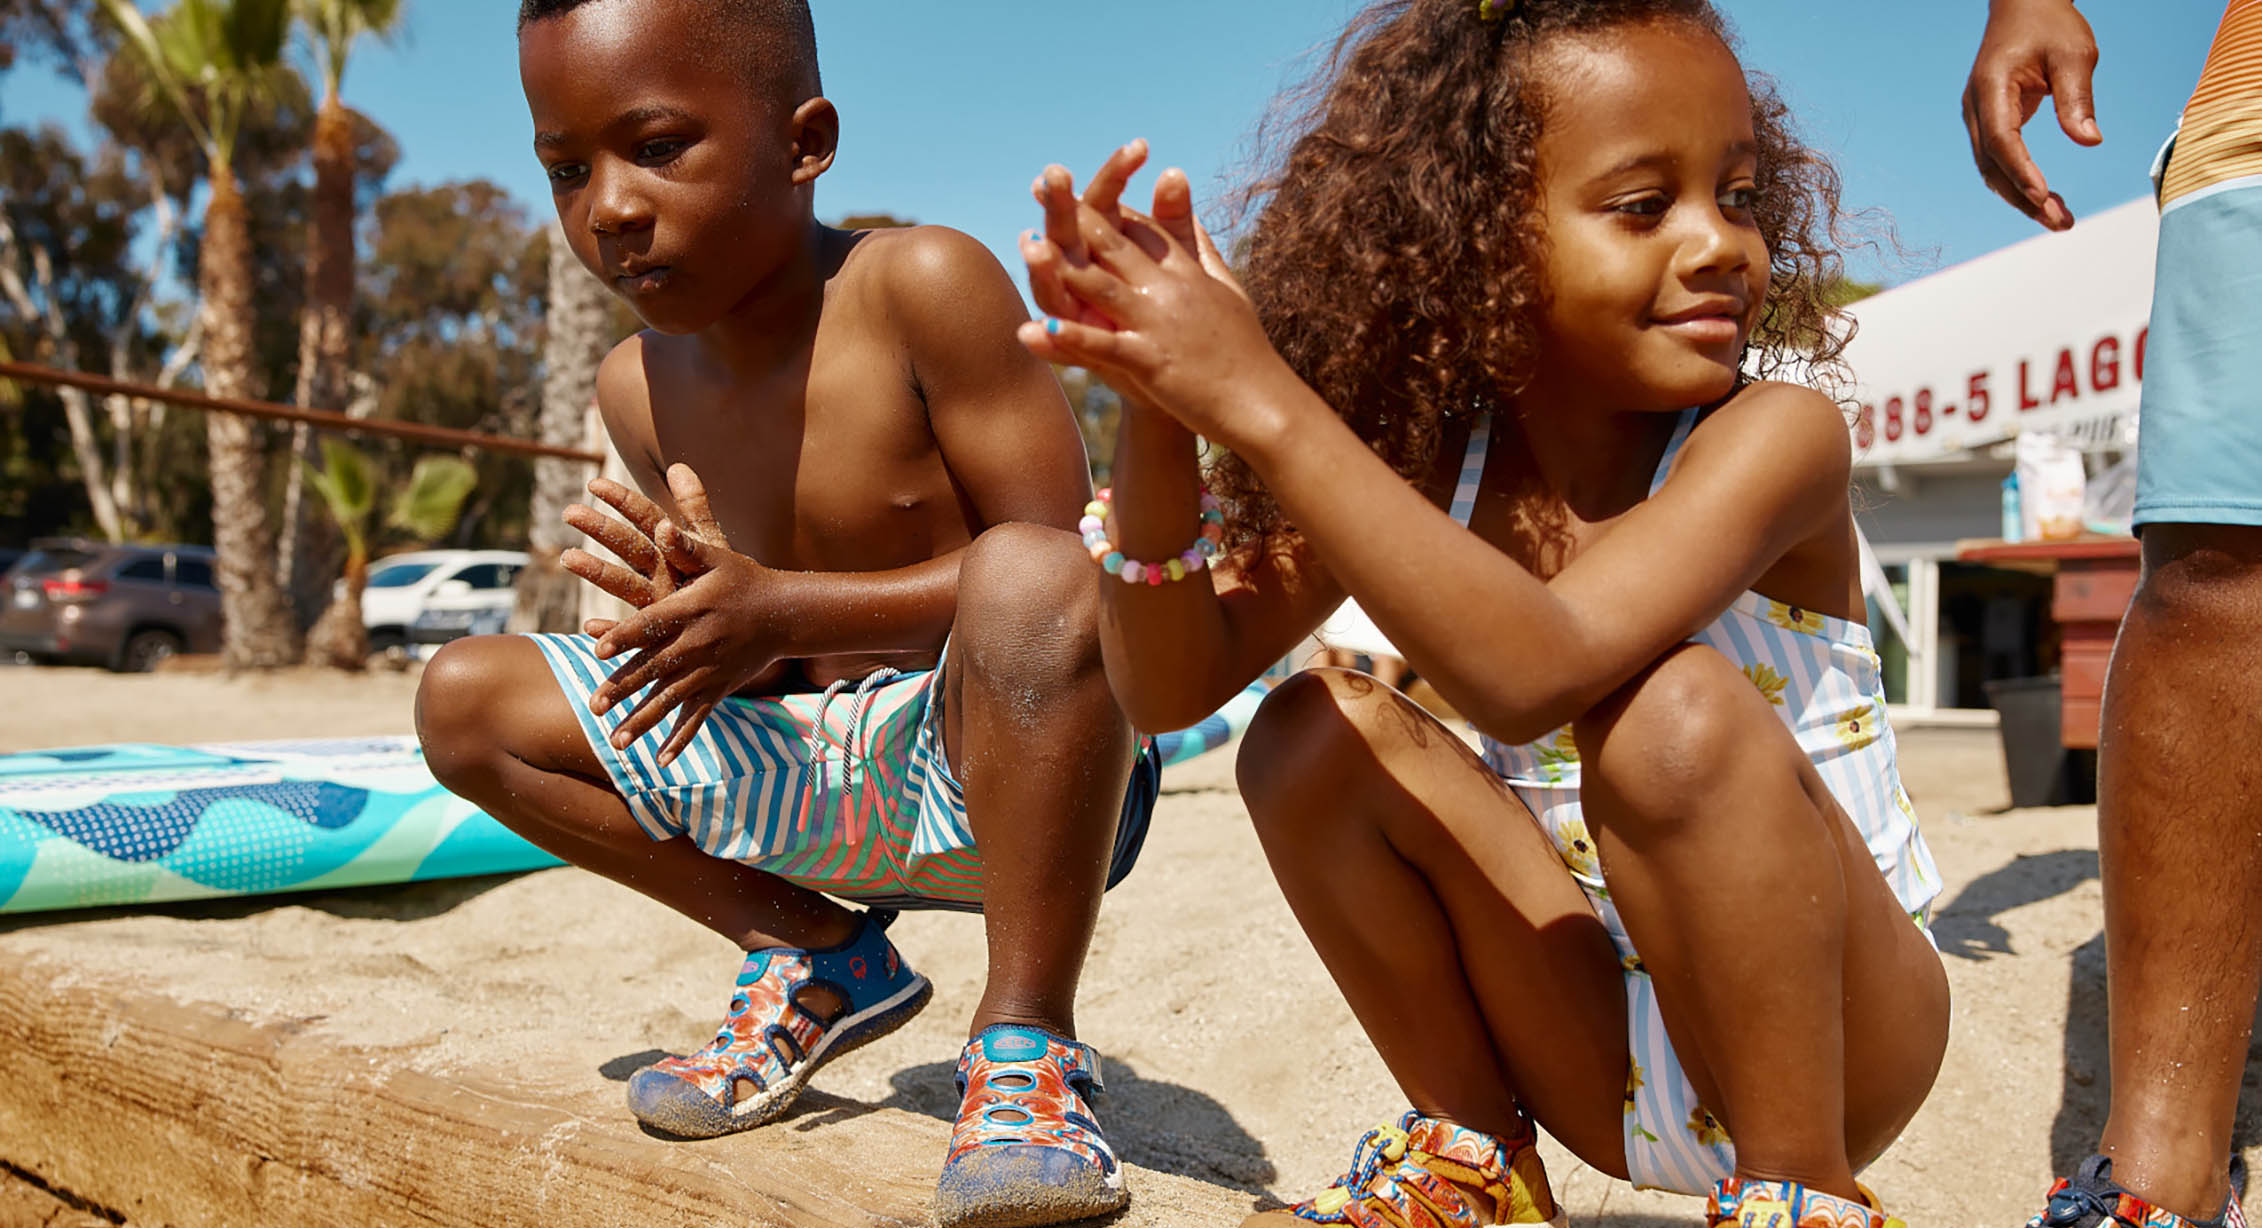 Kids in KEEN x Outdoor Afro sandals getting ready to swim